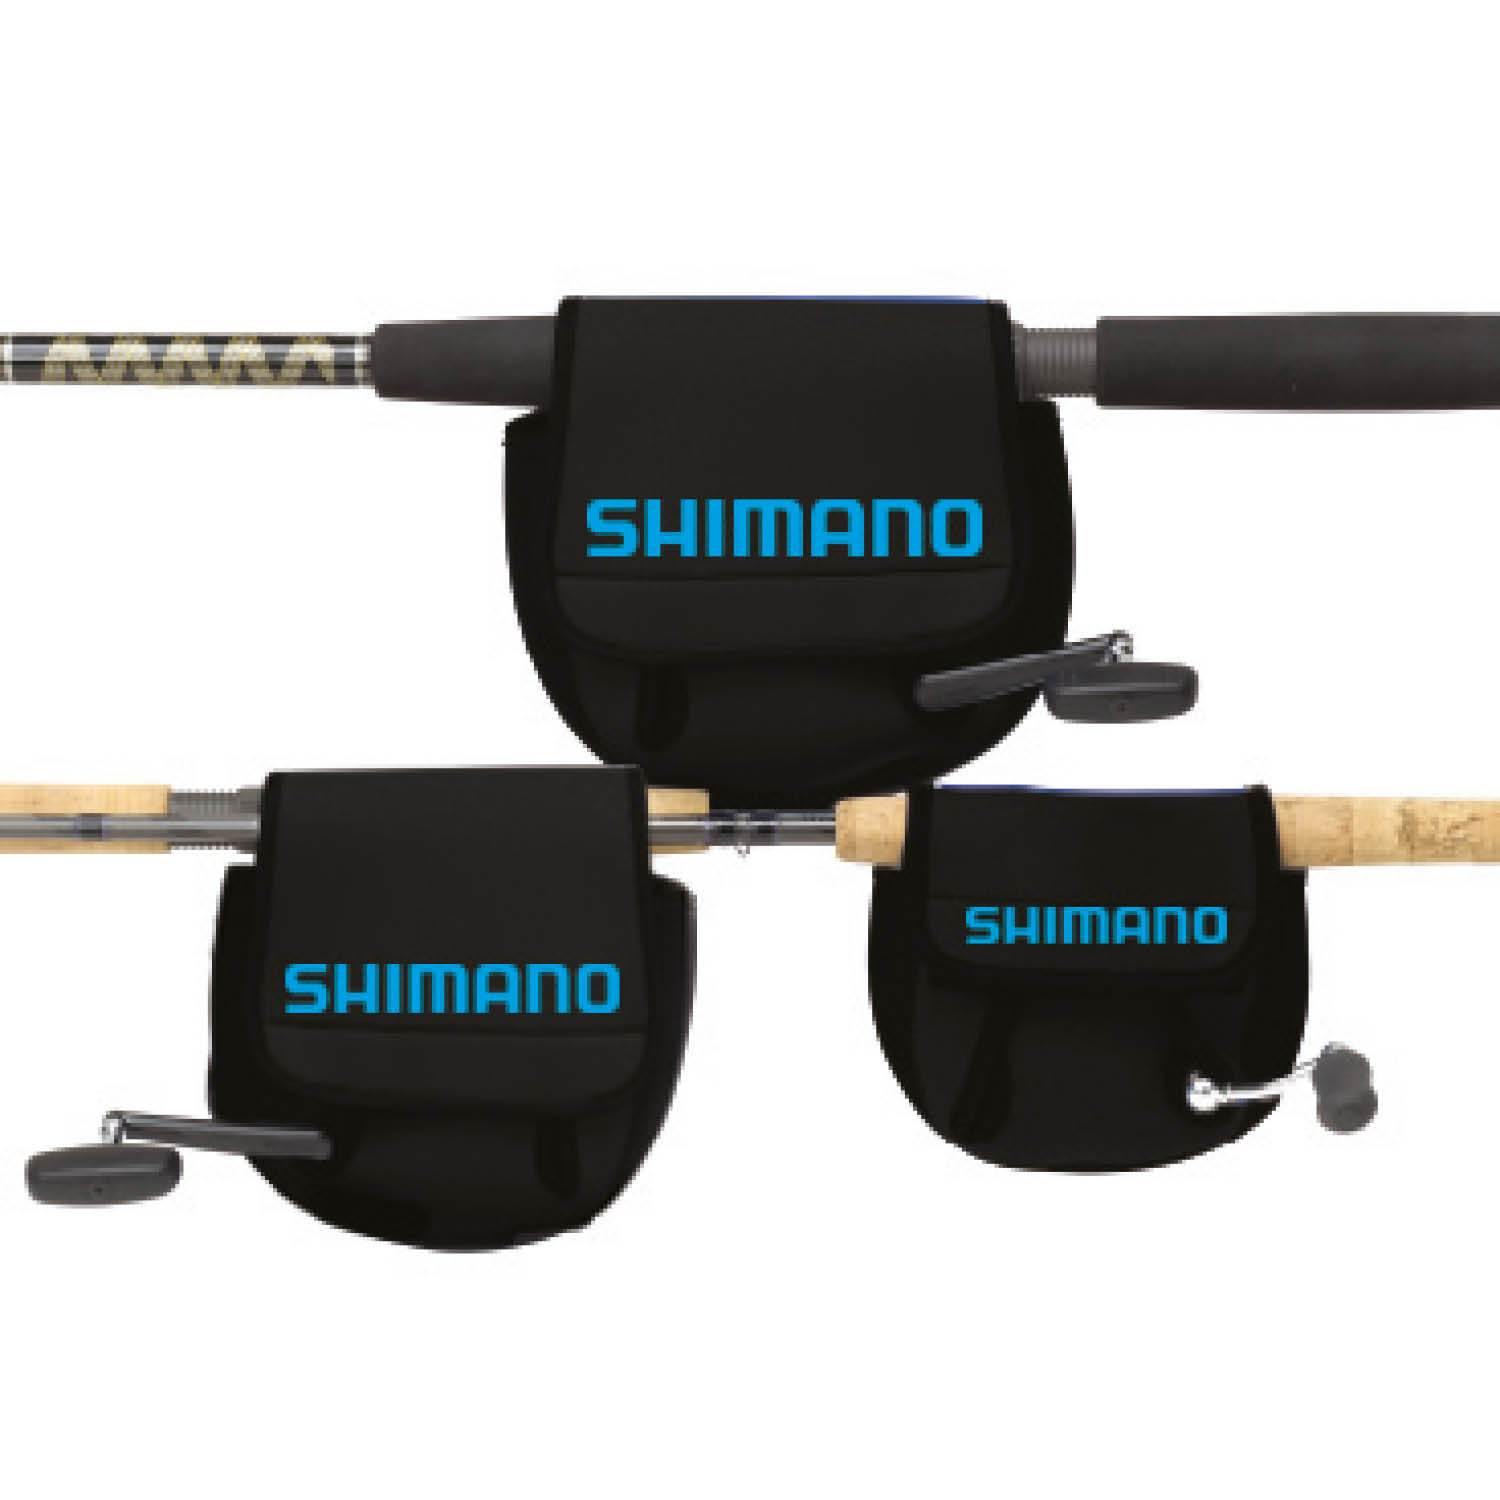 Shimano Grey Large Reel Case | Free Shipping Over $99